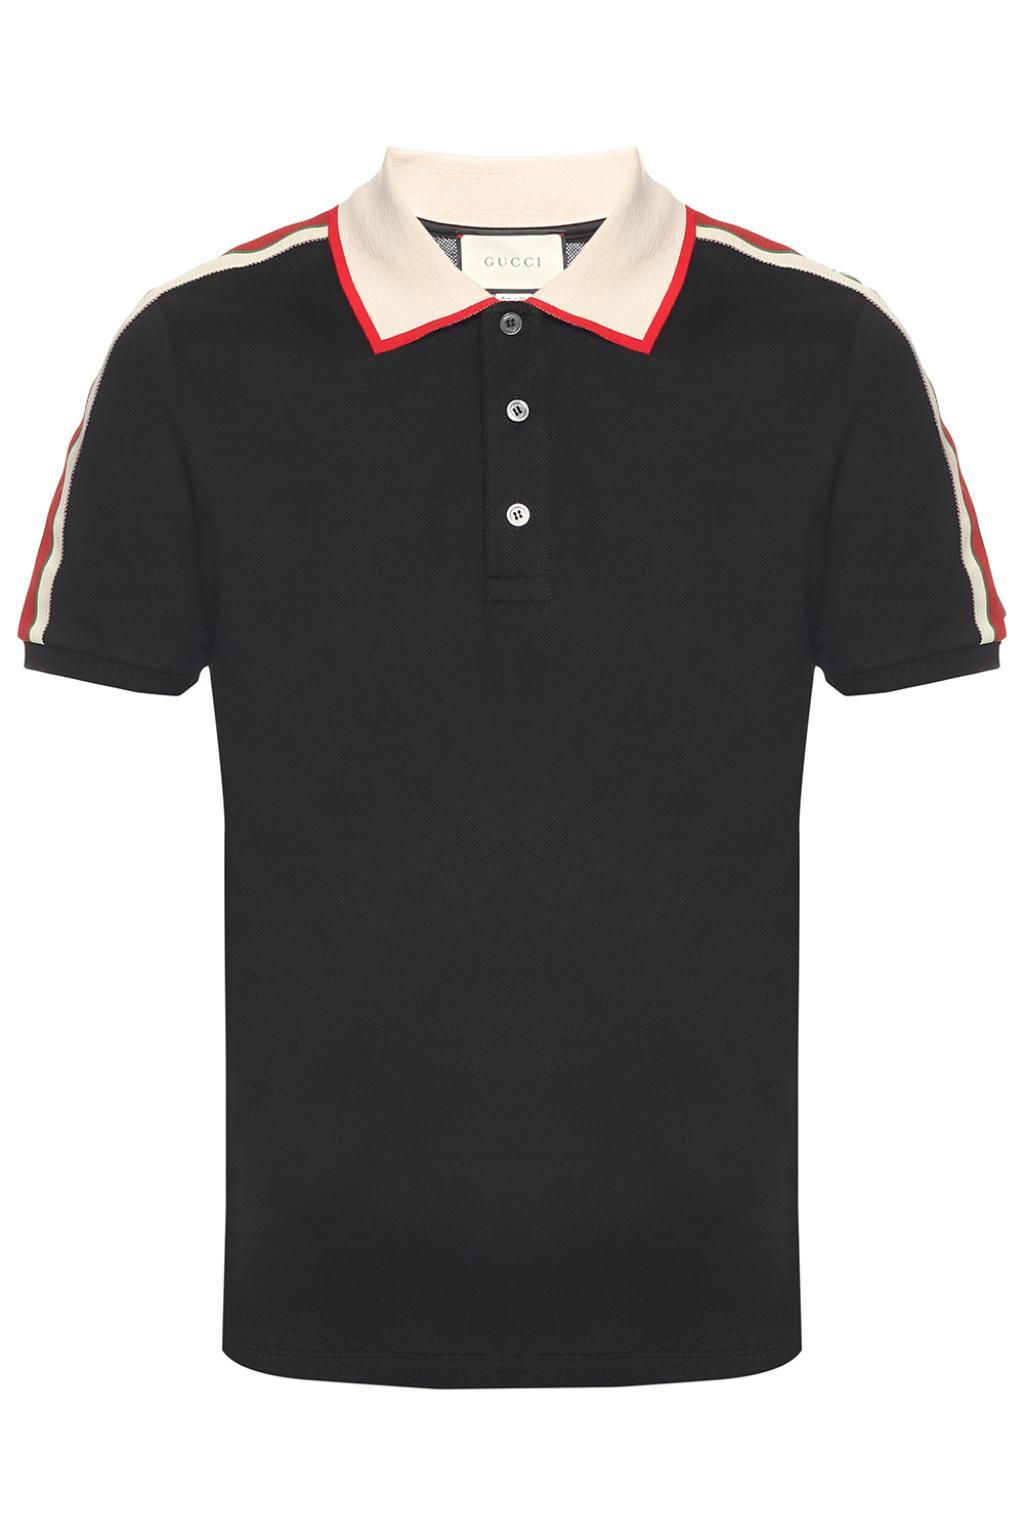 Gucci Taped Logo Polo Shirt in Black for Men | Lyst UK